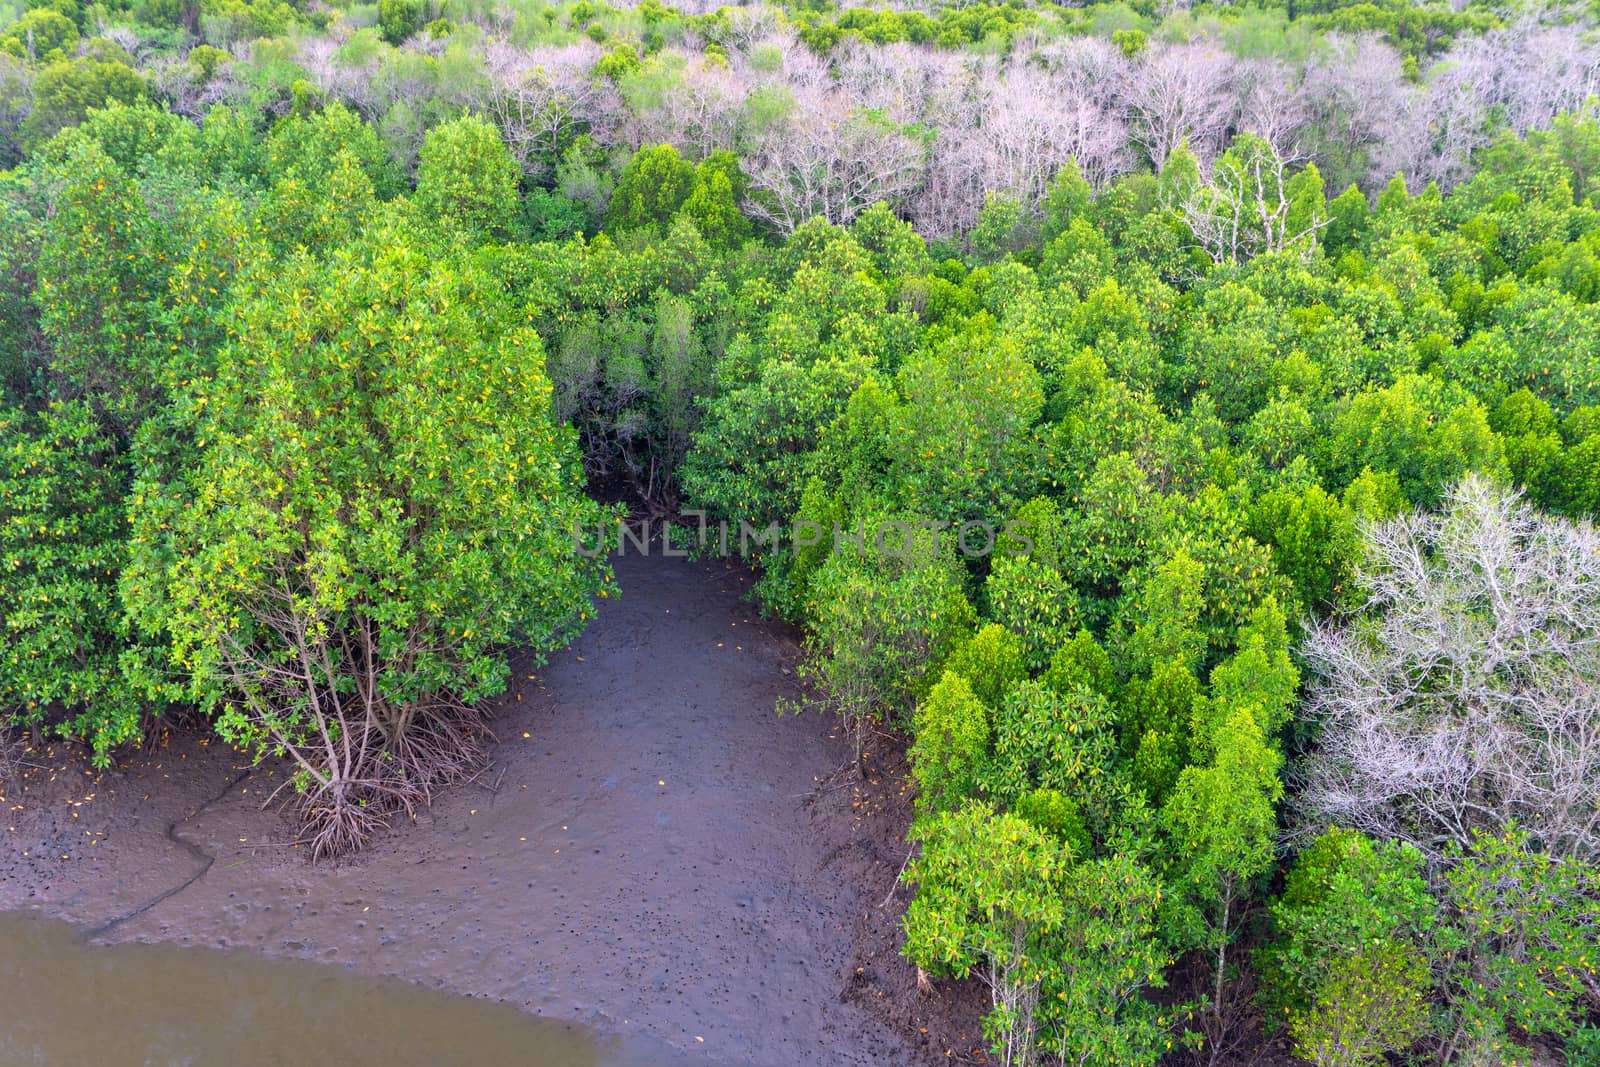 Above view of mangrove forest in thailand.